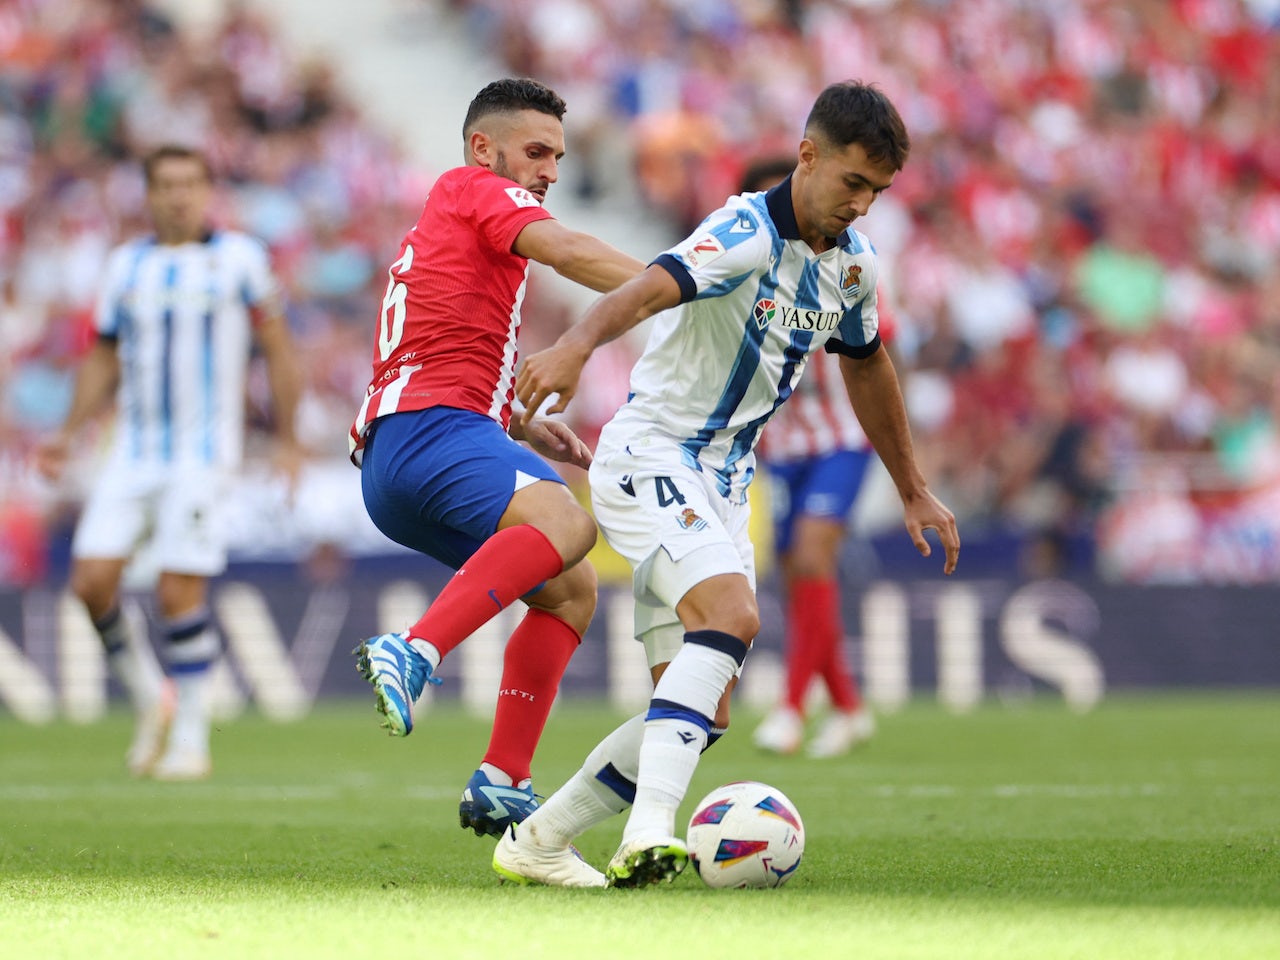 Arsenal 'closing in on Martin Zubimendi signing from Real Sociedad'